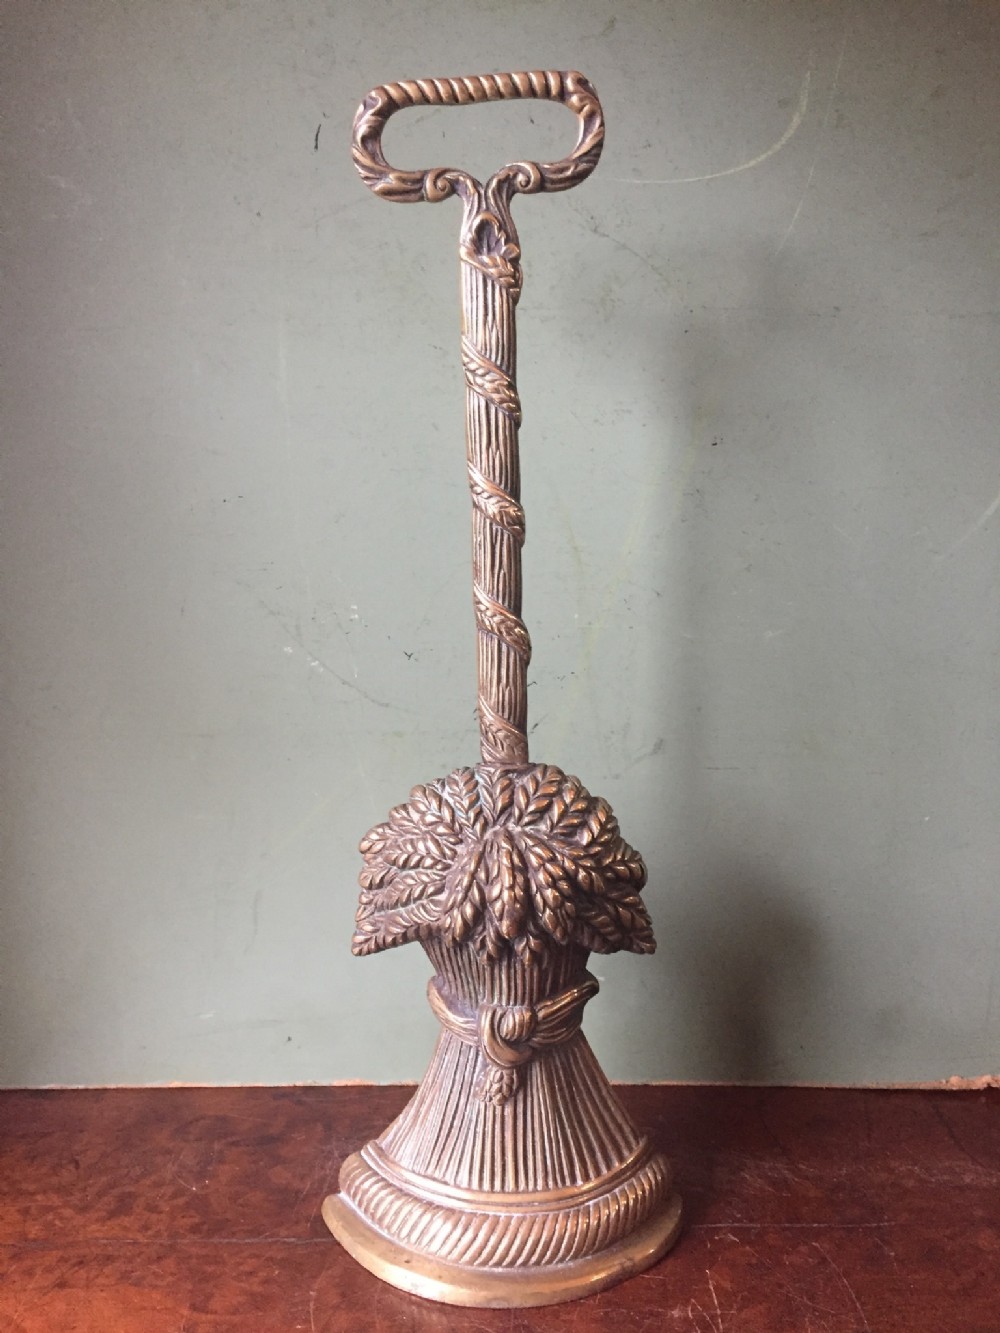 early c19th regency period cast brass doorporter or doorstop the base modelled as a sheaf of wheat